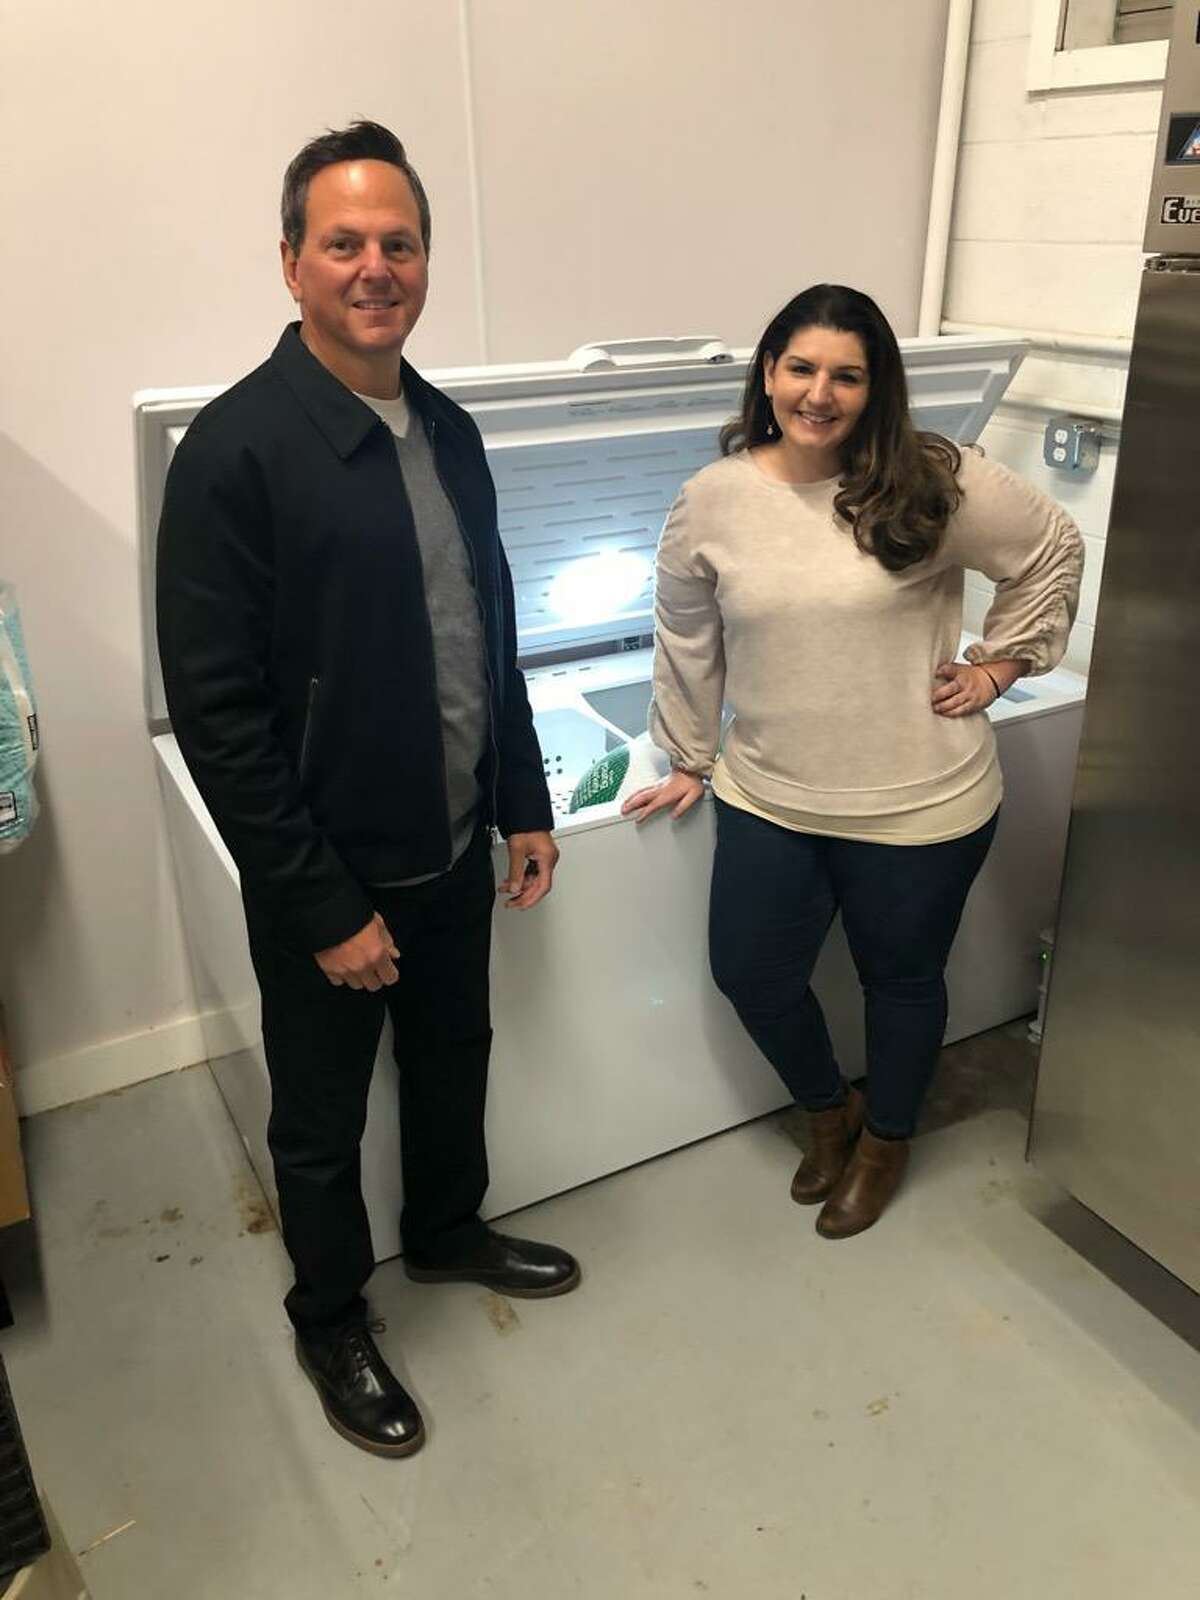 Community Dining Room Executive Director Judy Baron, right, poses with a chest freezer donated by Hallock's in Branford and Michael Vizziello, left, of Shoreline Social Media Group who works directly with Hallock's and its owner Jack Fast.